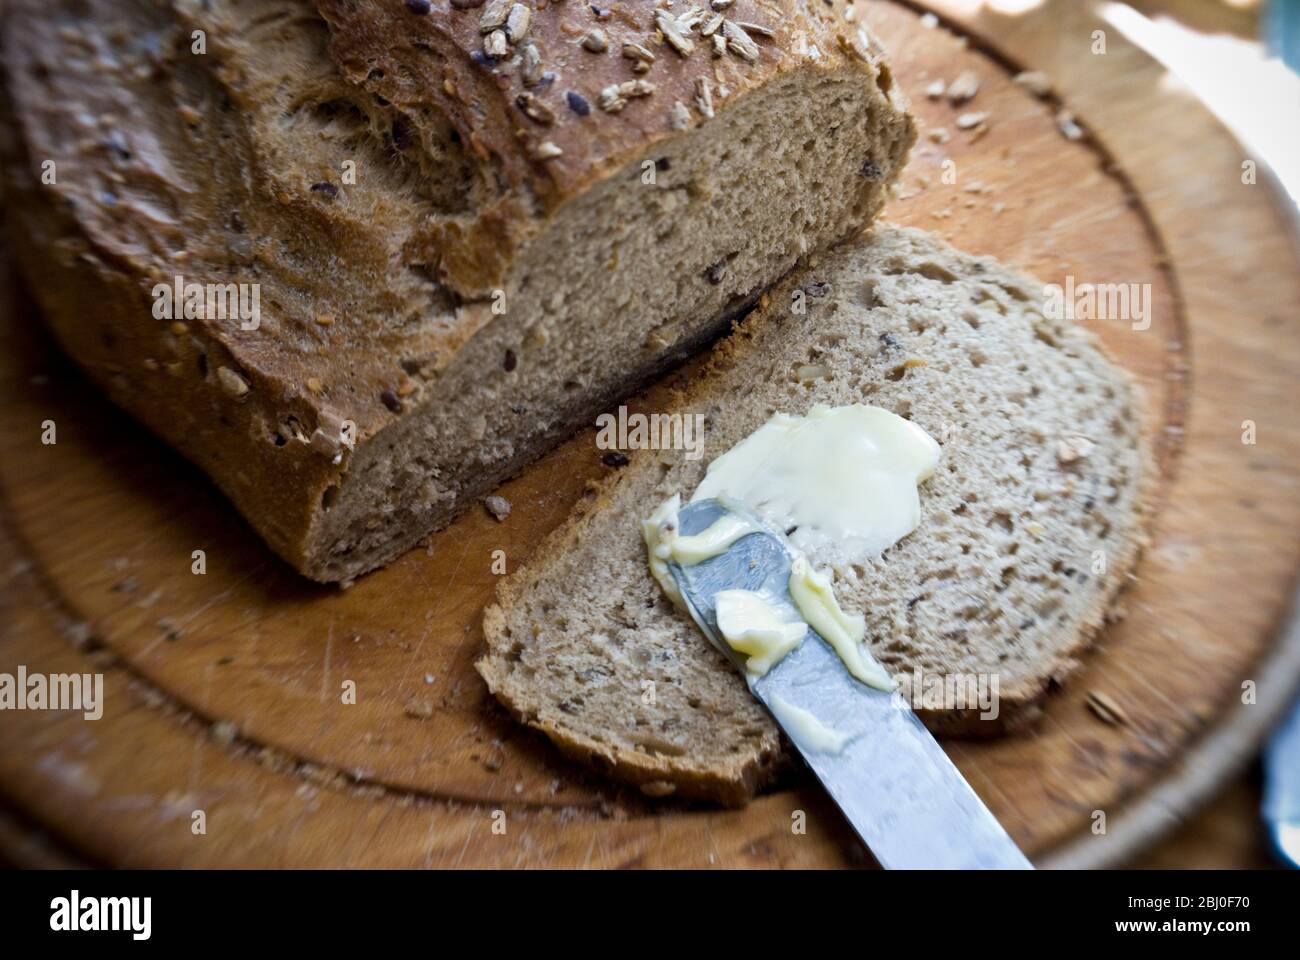 Buttering a slice of bread from a wholegrain, rye and walnut loaf on old wooden board. - Stock Photo